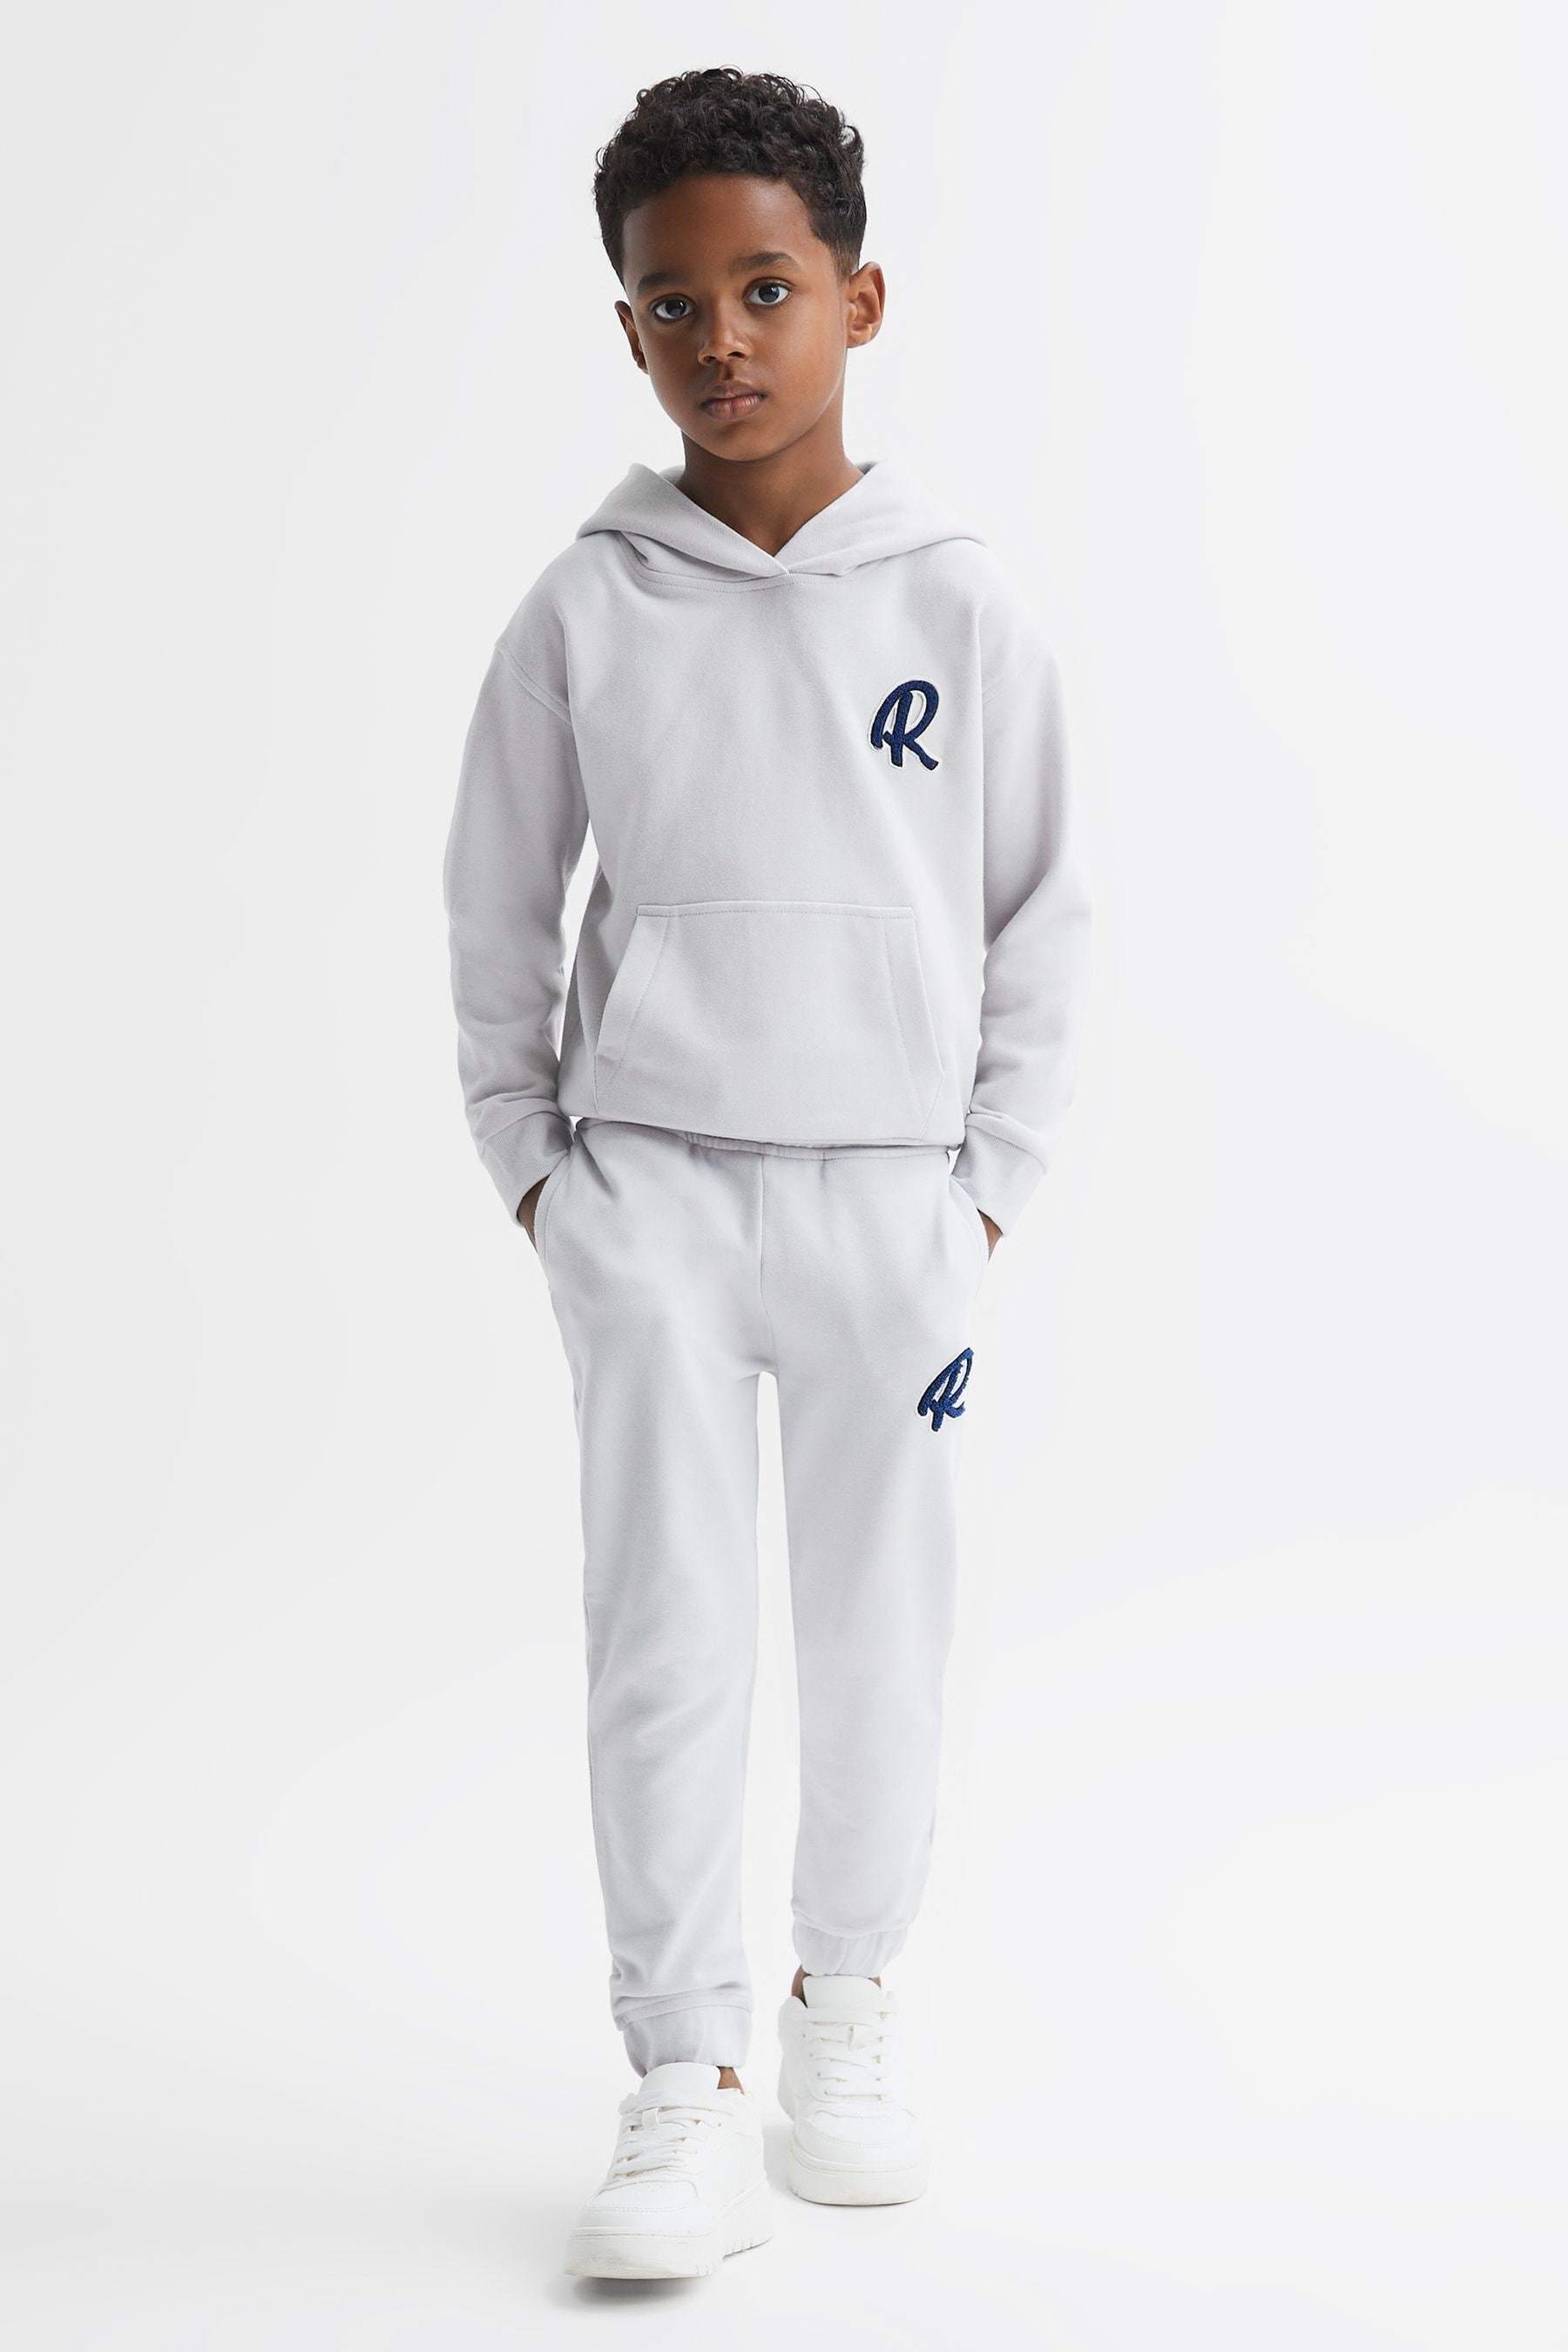 Reiss Toby - Ice Blue Junior Garment Dyed Logo Joggers, Age 6-7 Years